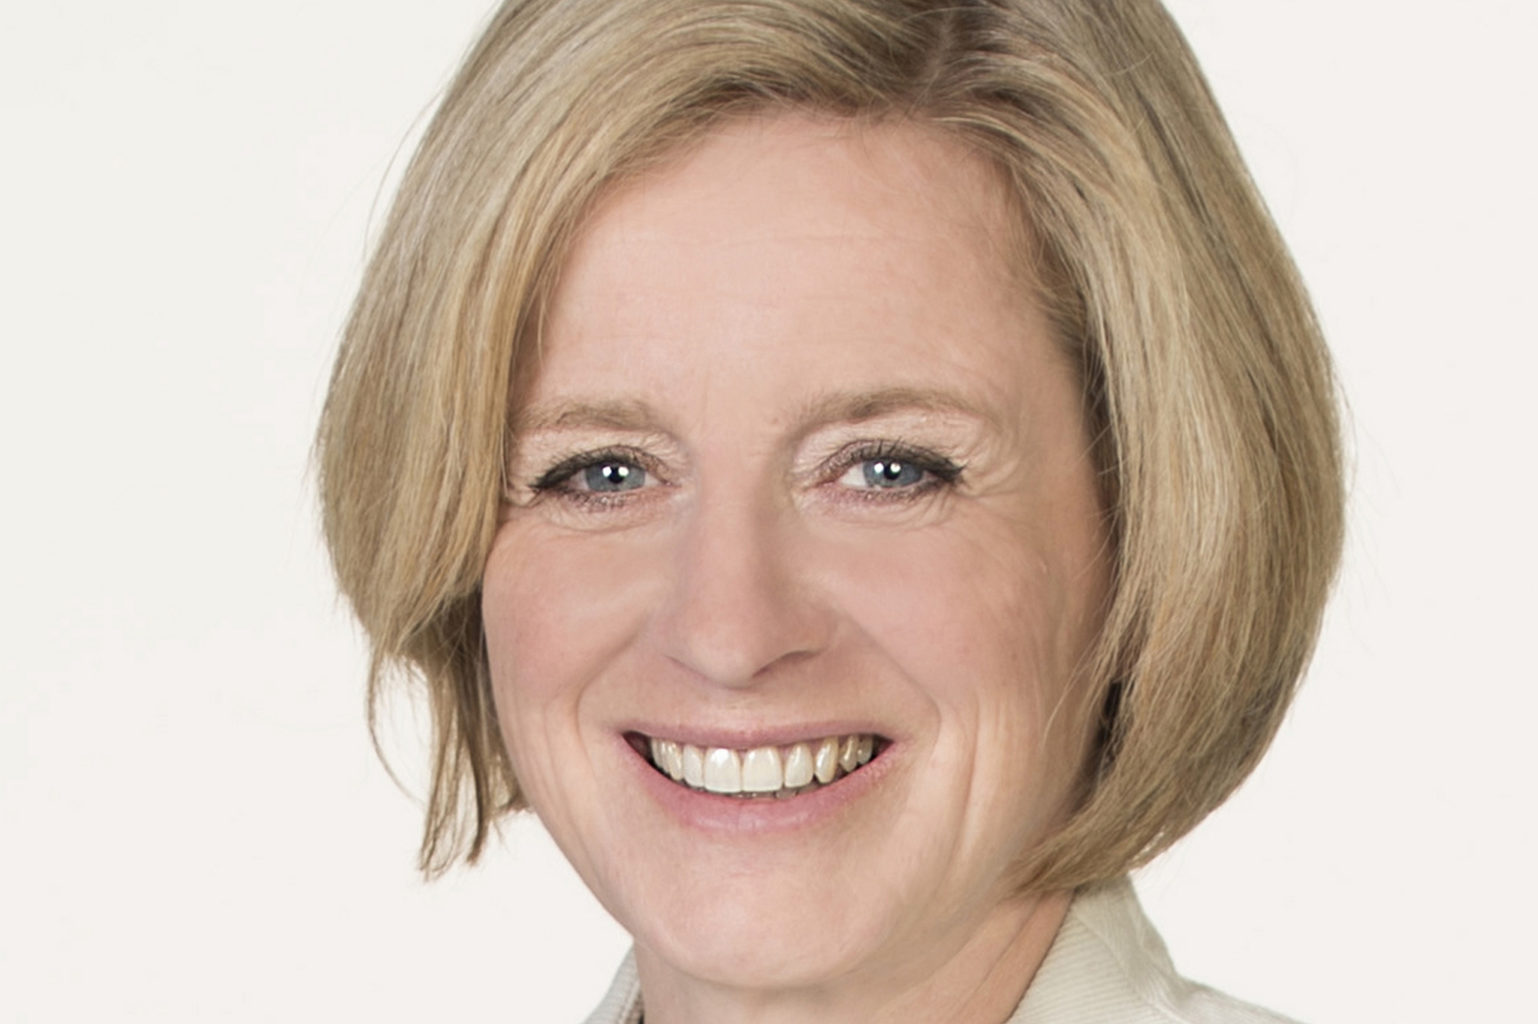 New Year 2018: Statement from Premier Notley